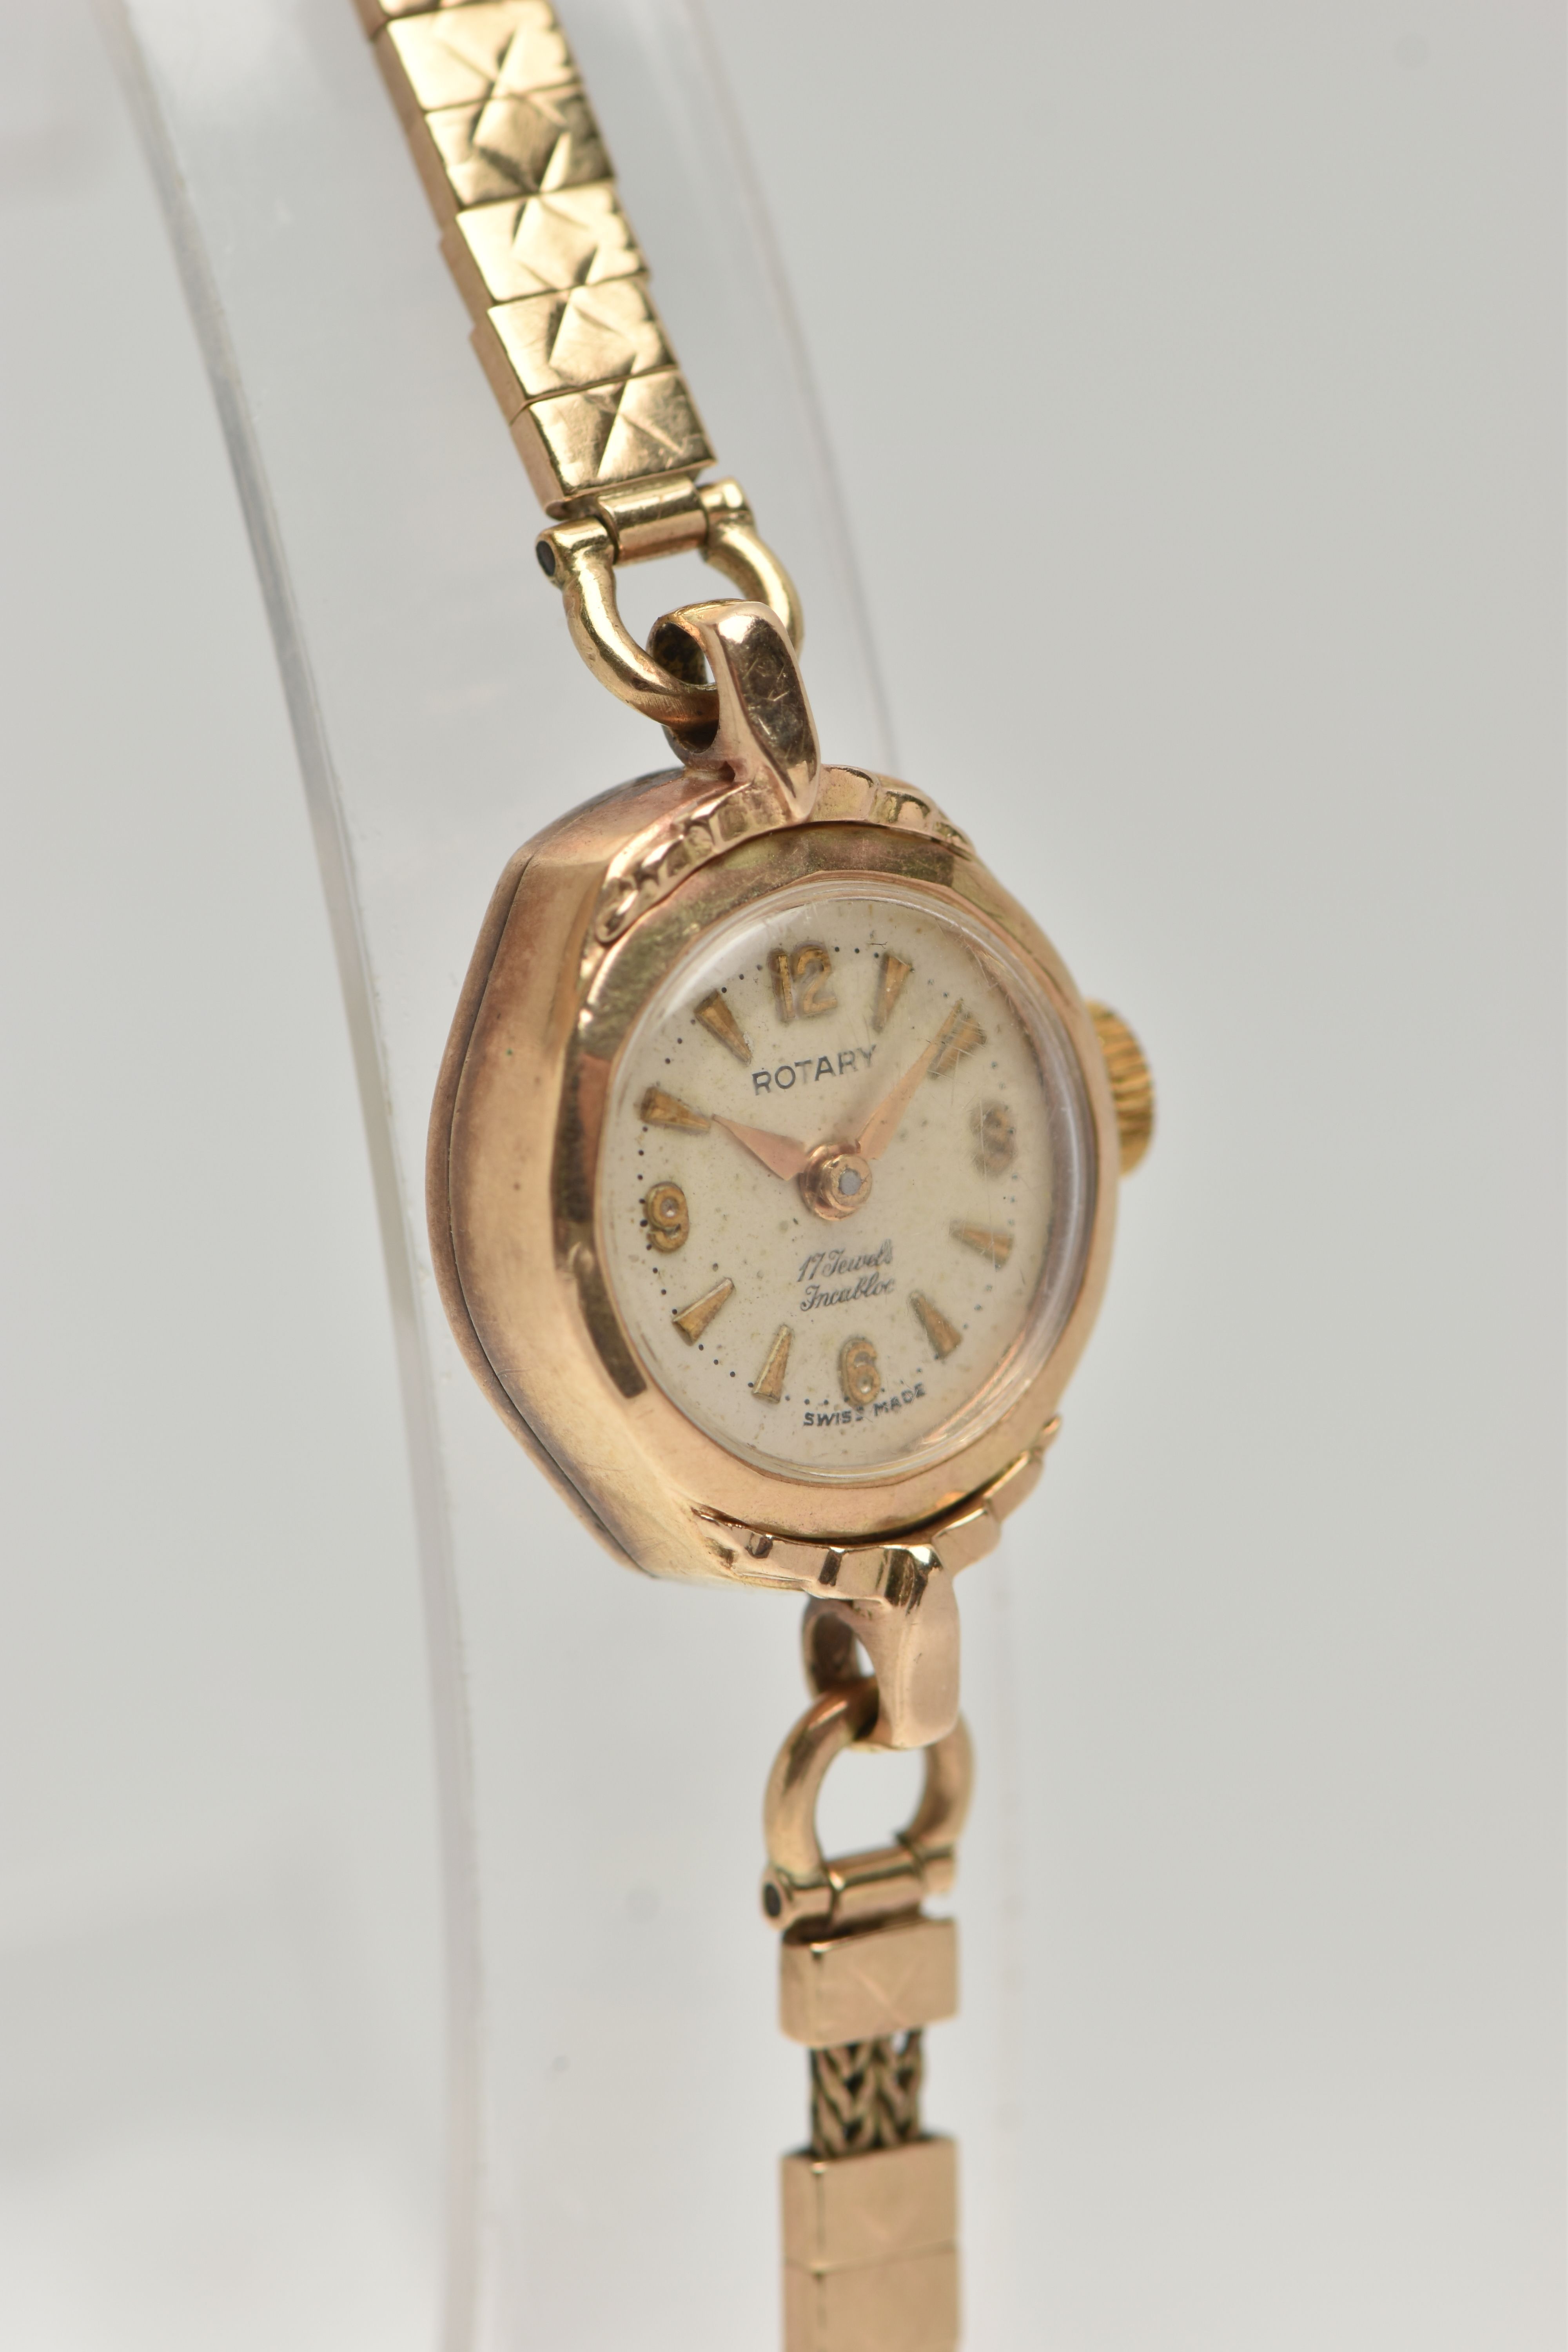 A LADYS 9CT GOLD 'ROTARY' WRISTWATCH, manual wind, round silver dial signed 'Rotary 17 jewels - Image 2 of 6